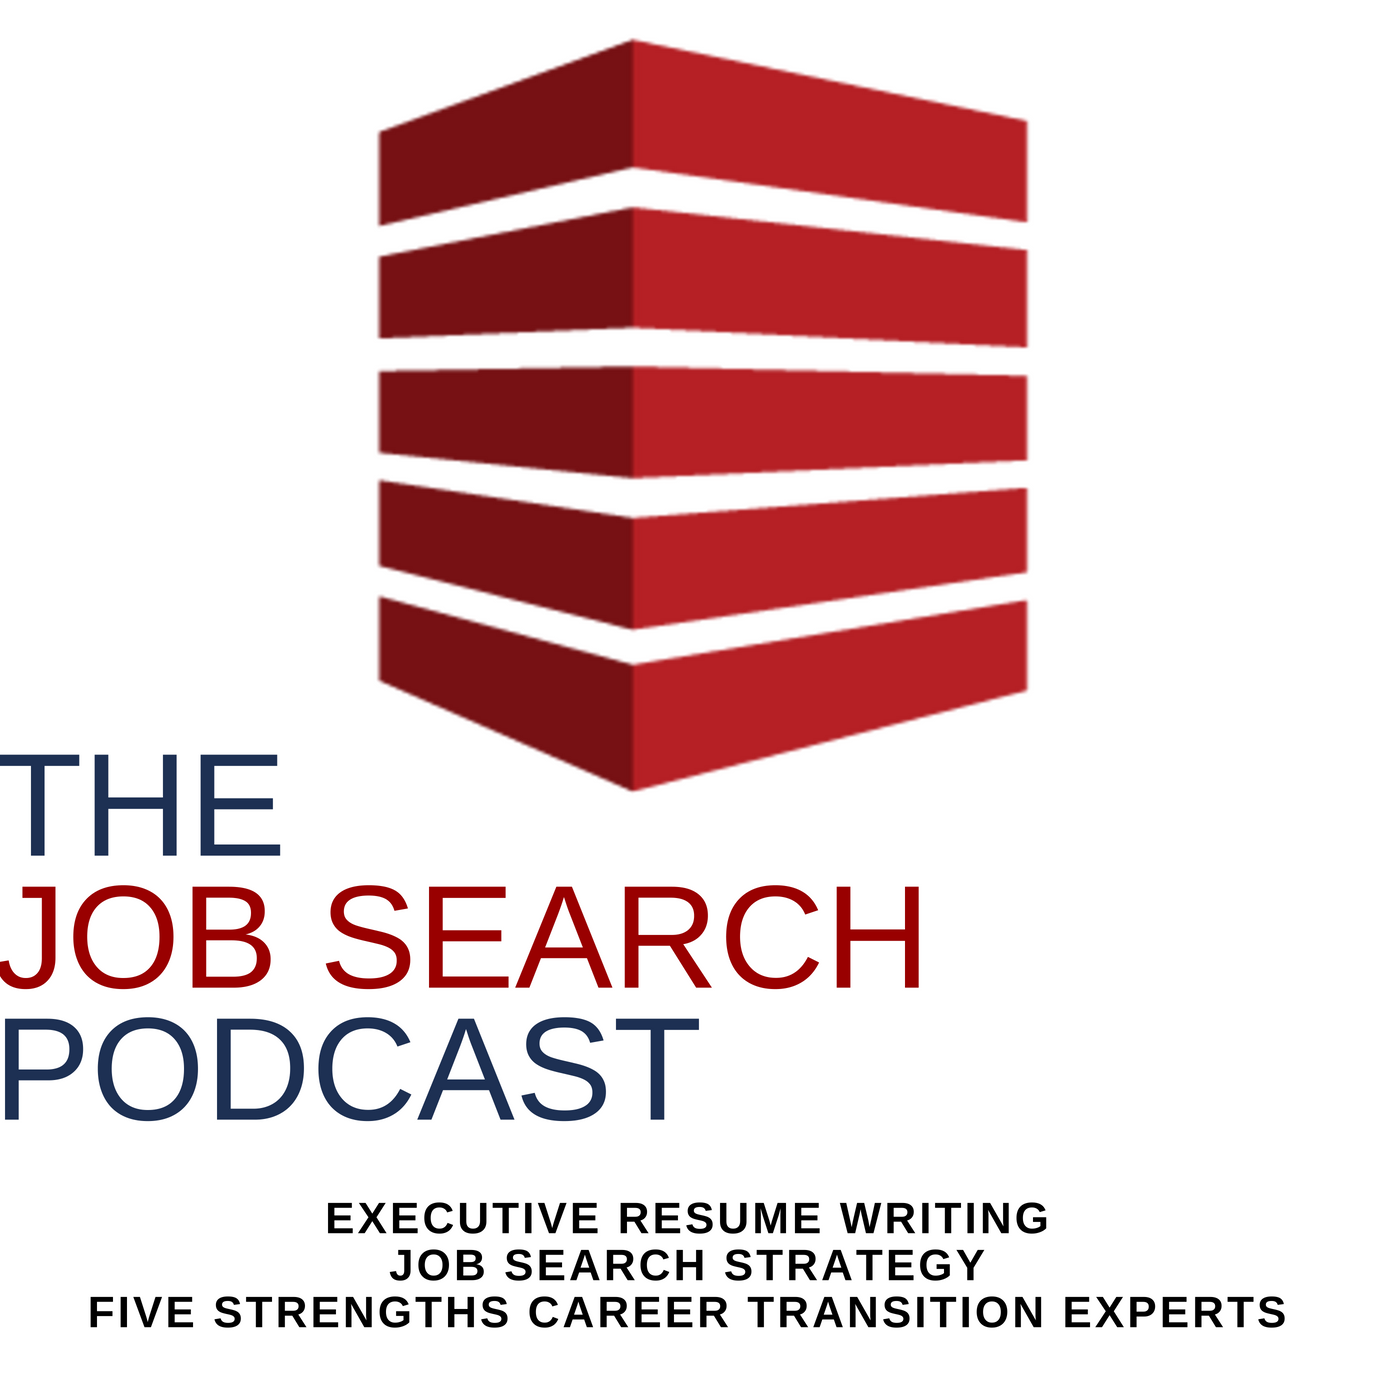 Stop Writing Your Executive Resume Right Now Create Your Strategic Career Plan First | The Job Search Podcast